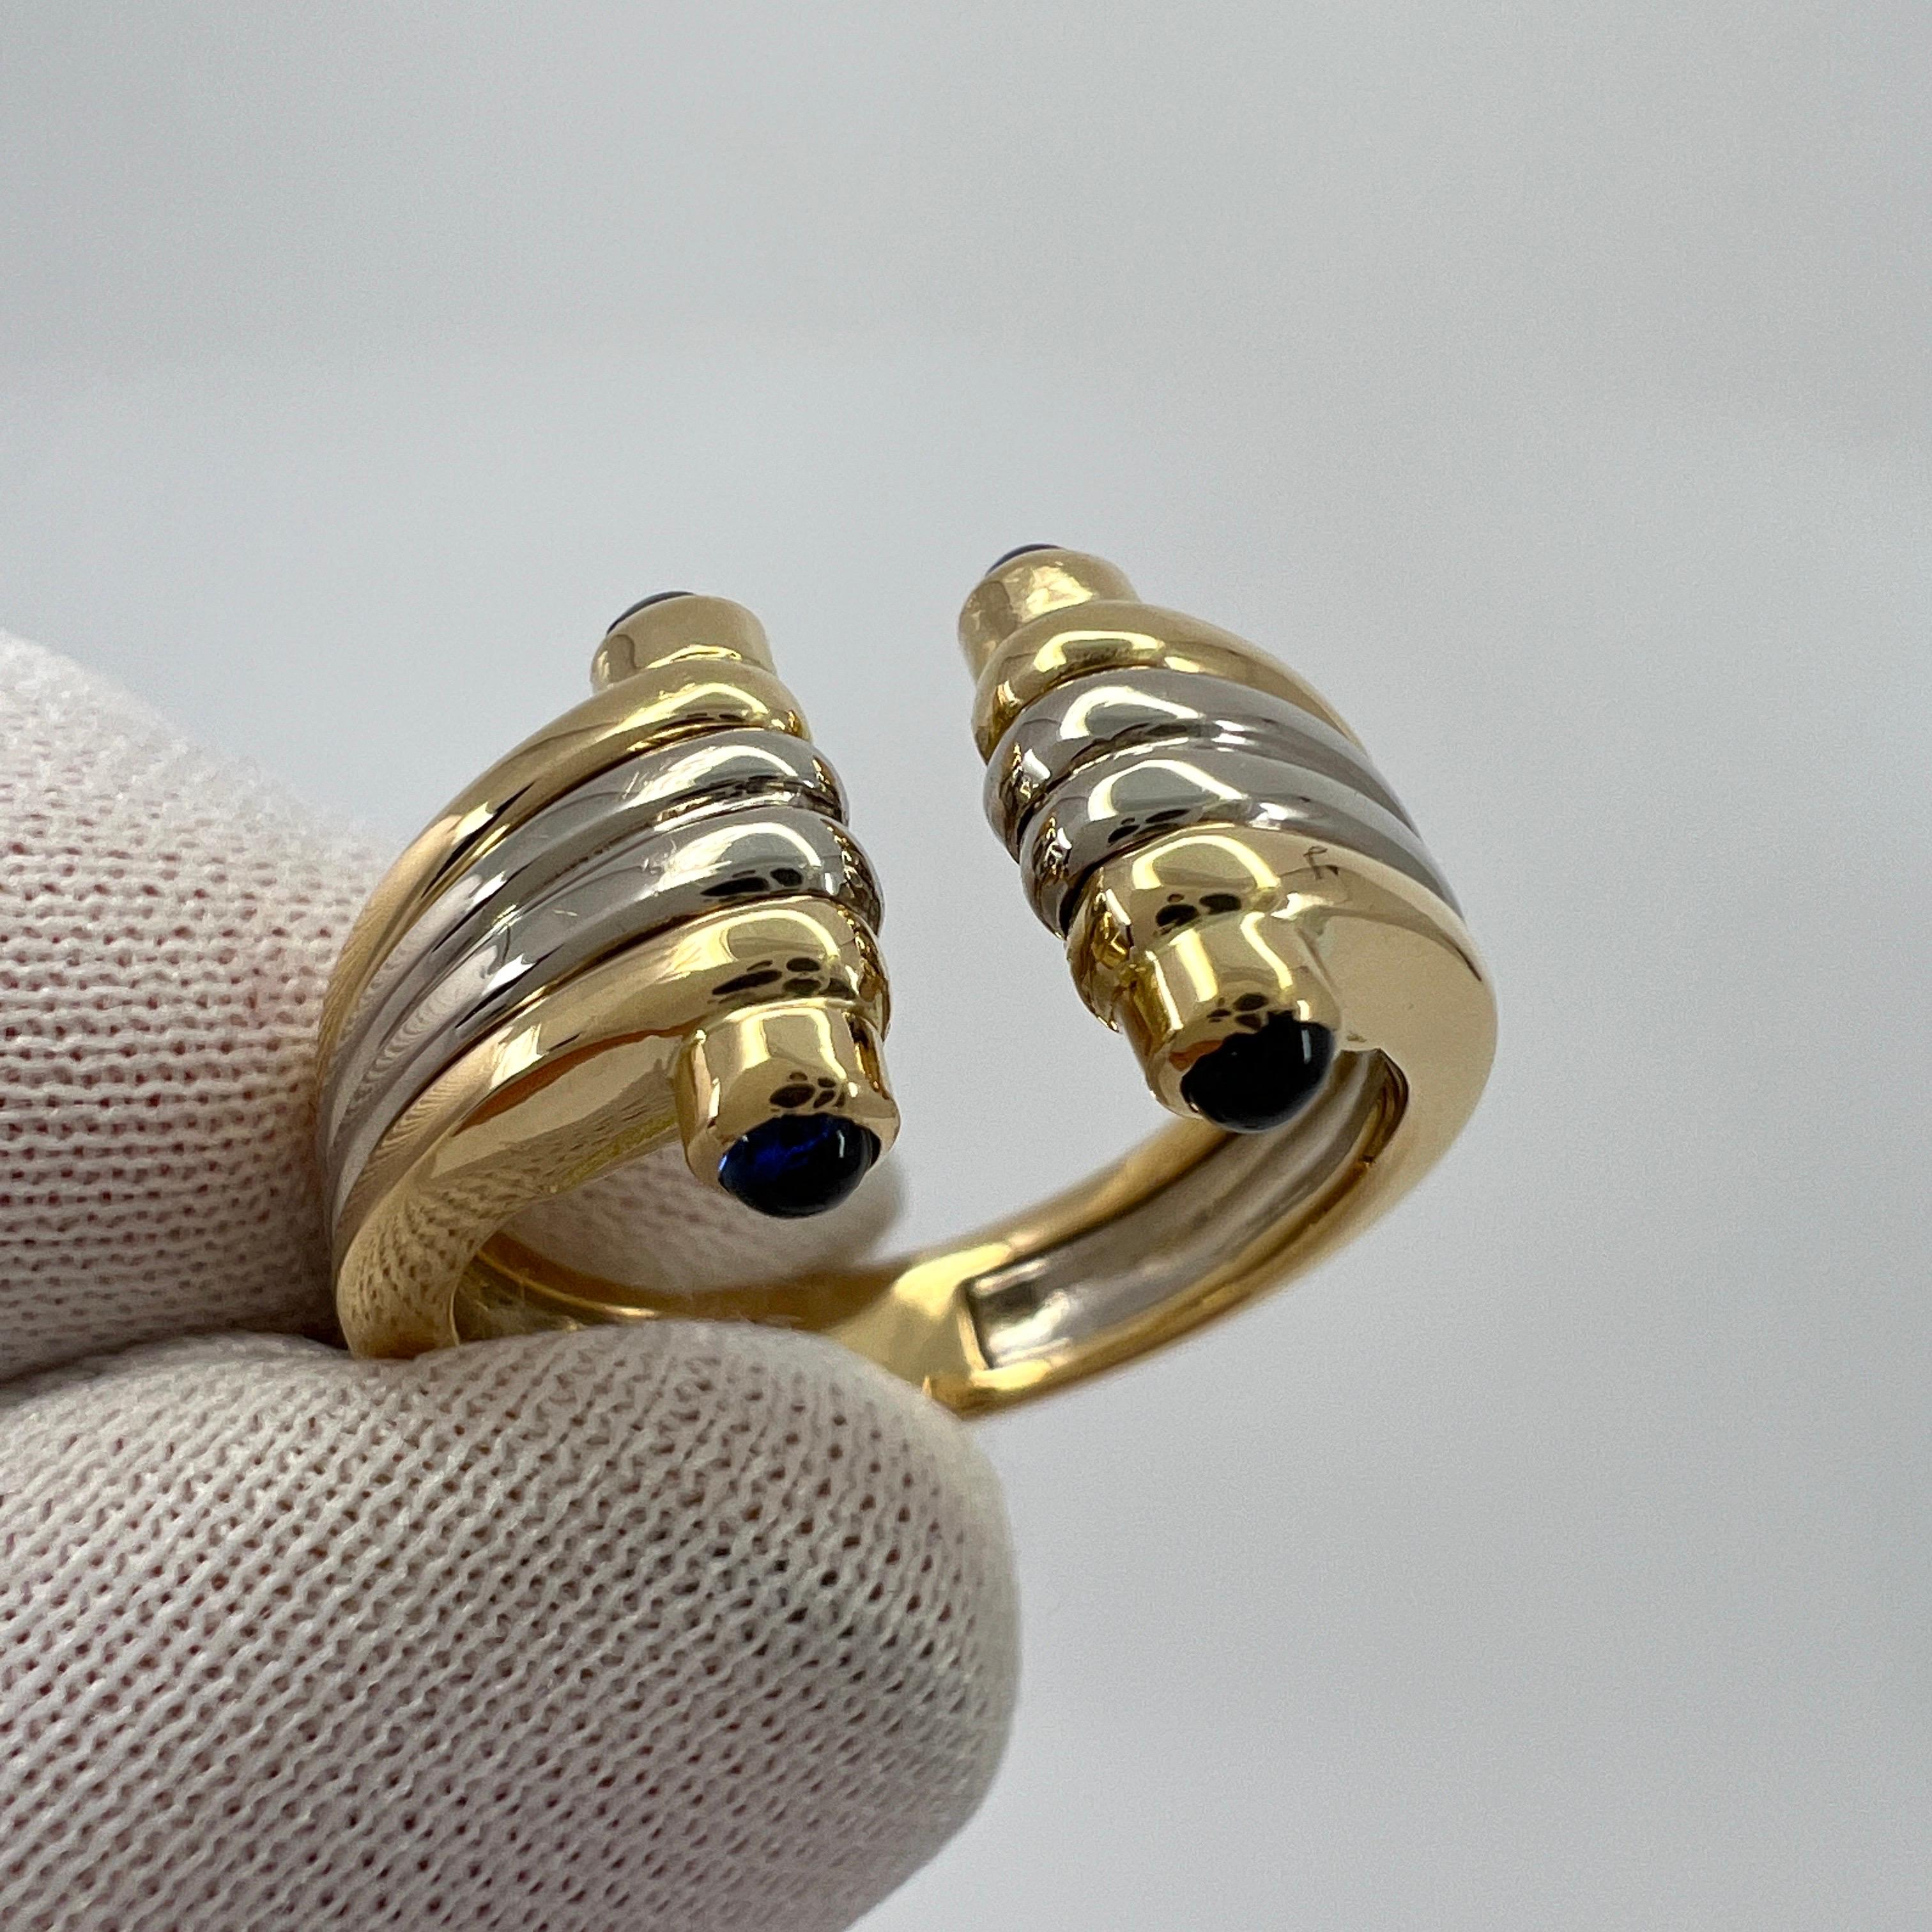 Vintage Van Cleef & Arpels Blue Sapphire 18k White & Yellow Gold Open Band Ring For Sale 1